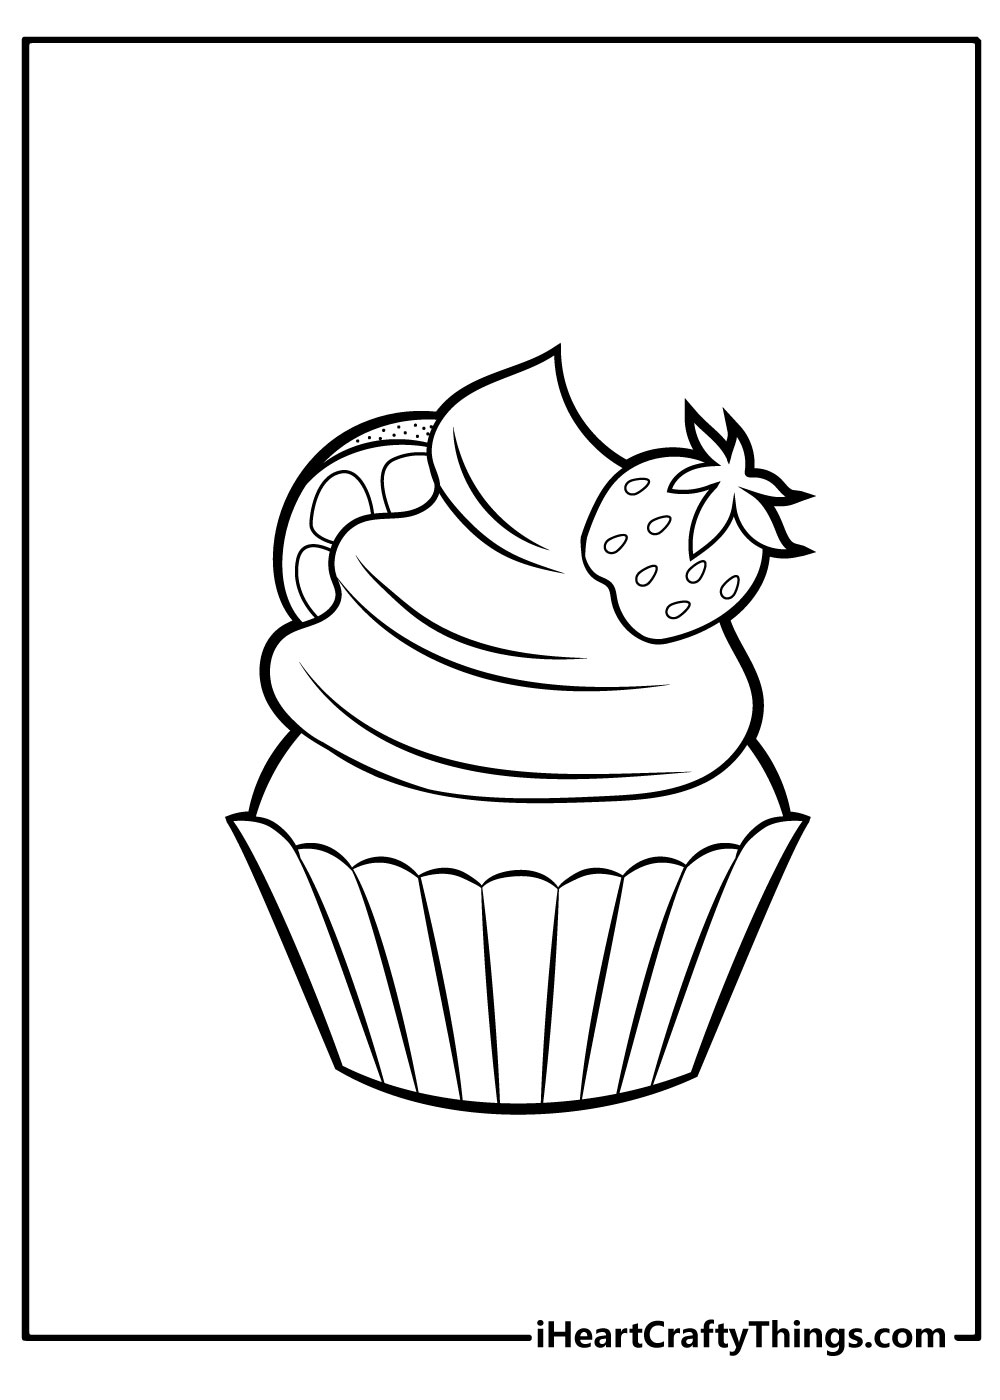 Printable Cupcake Coloring Pages Updated 20